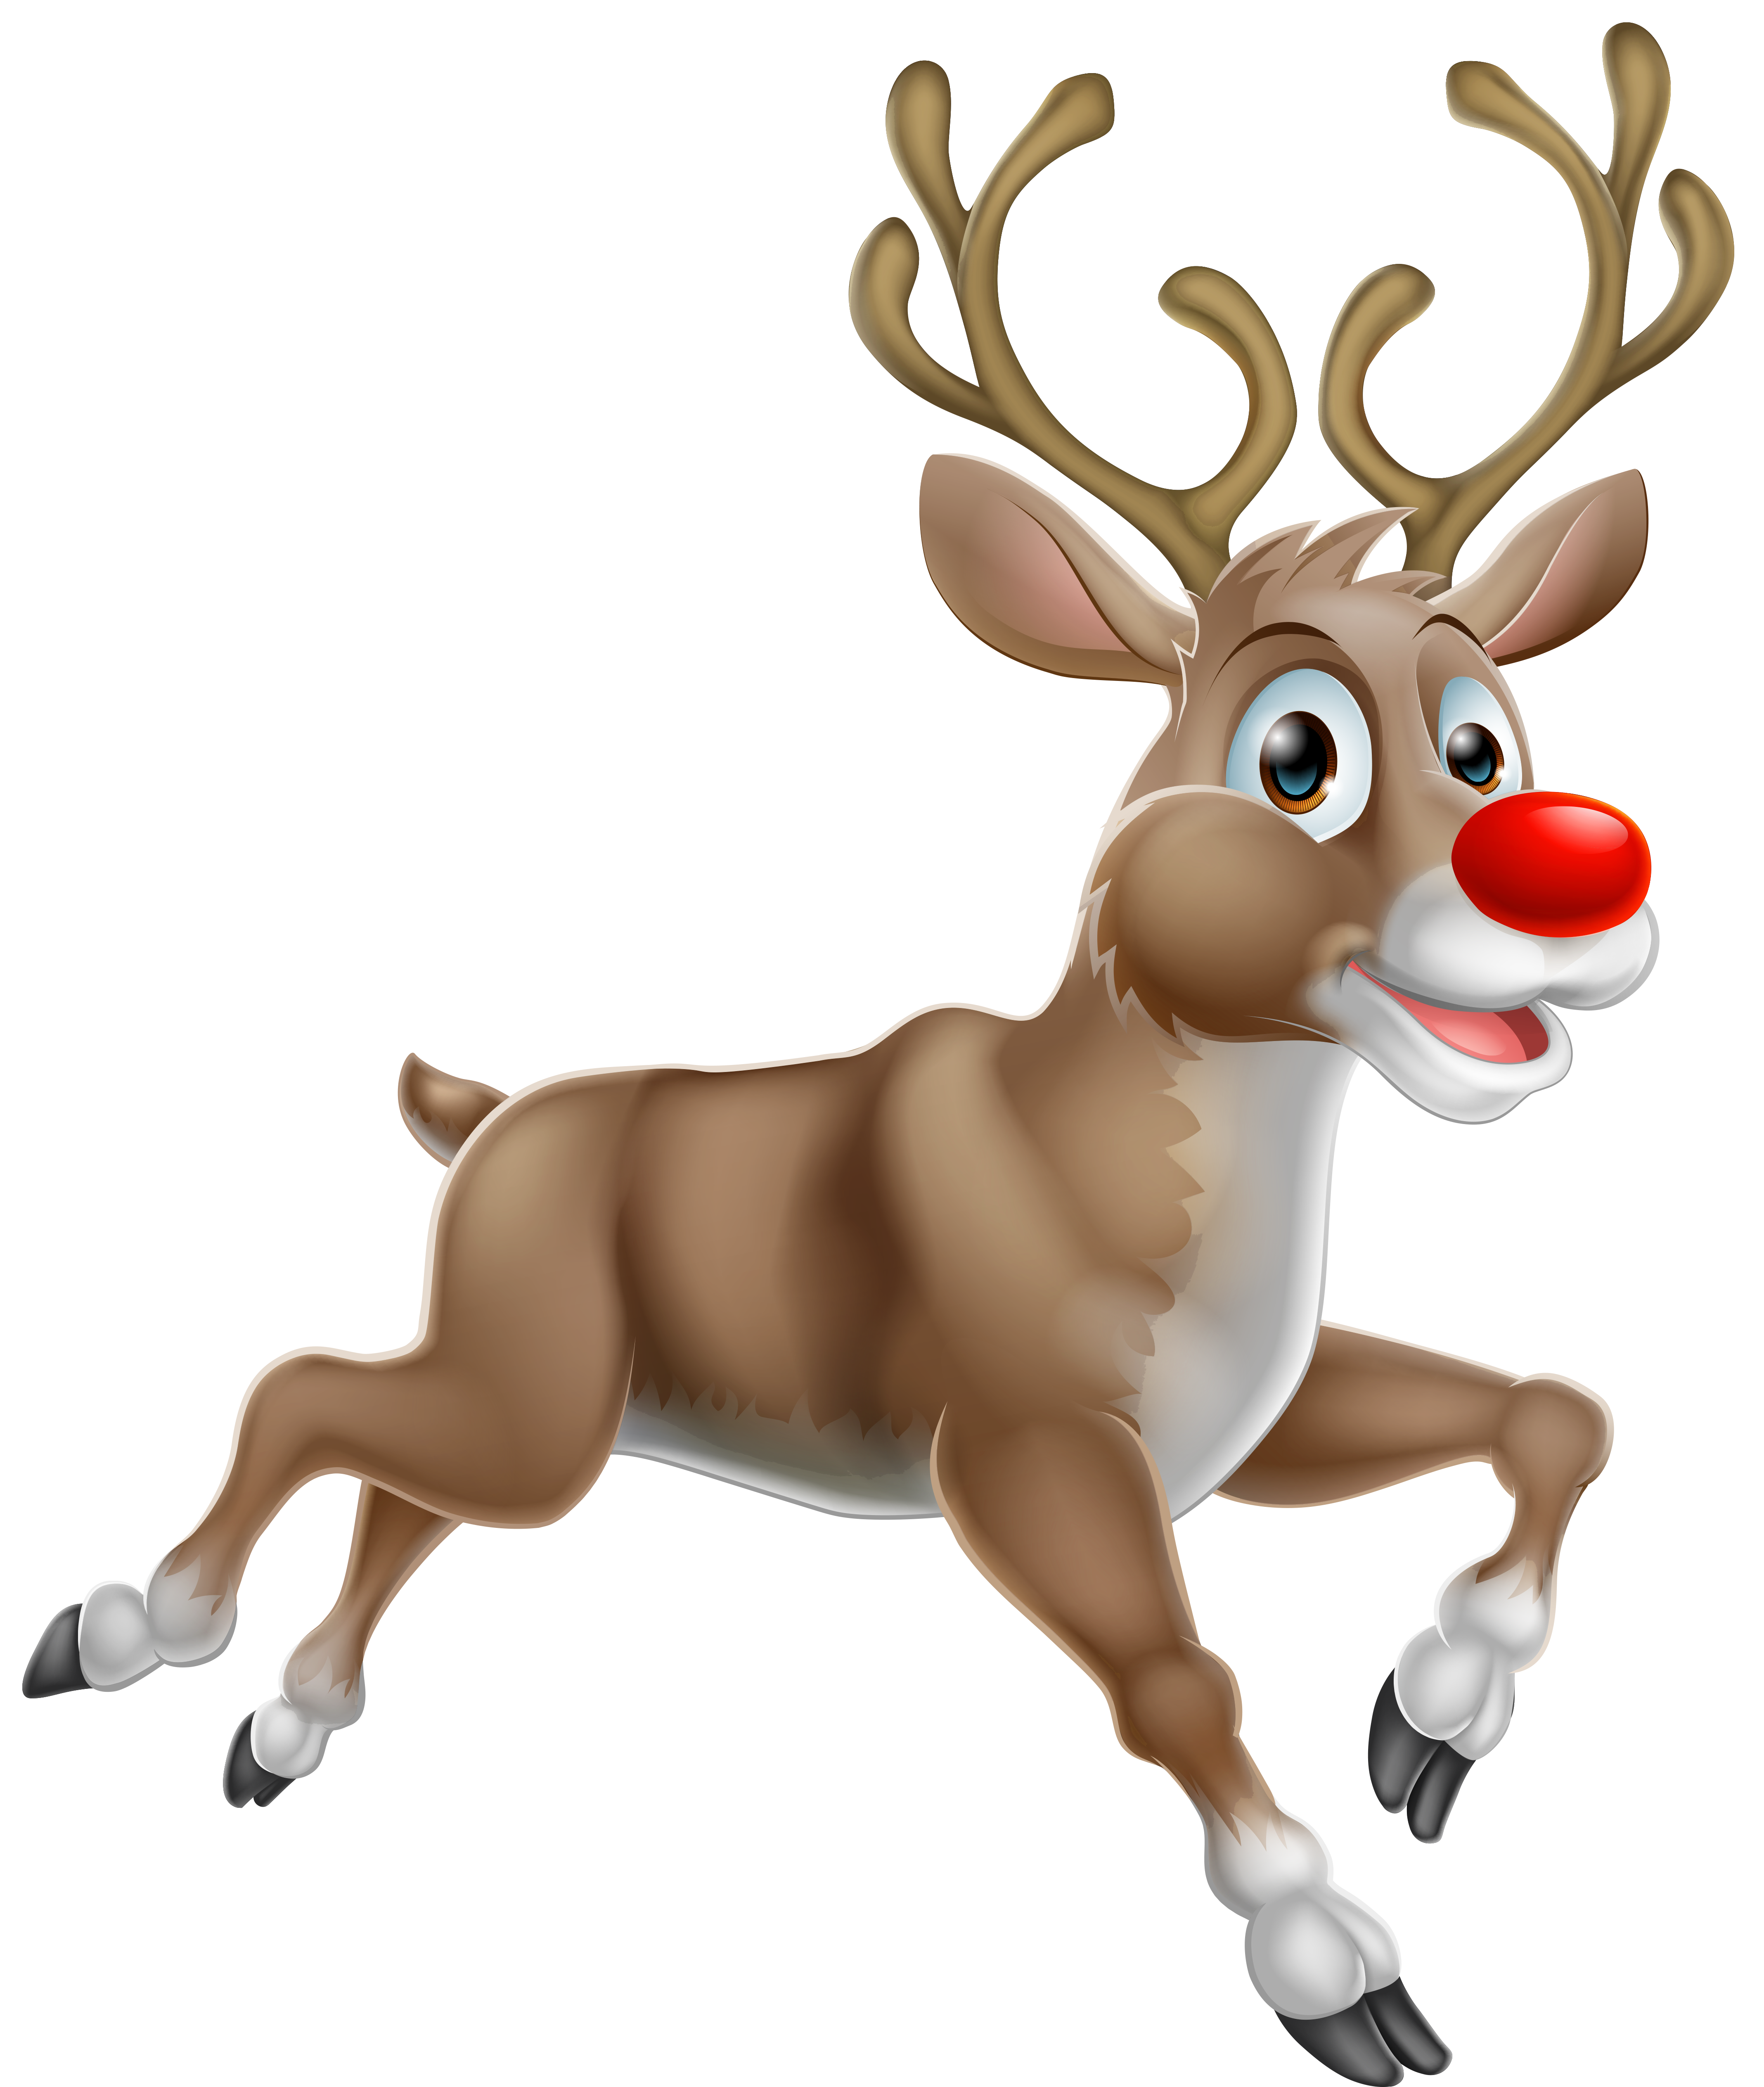 List 98+ Wallpaper Picture Of Rudolph The Red-nosed Reindeer Sharp